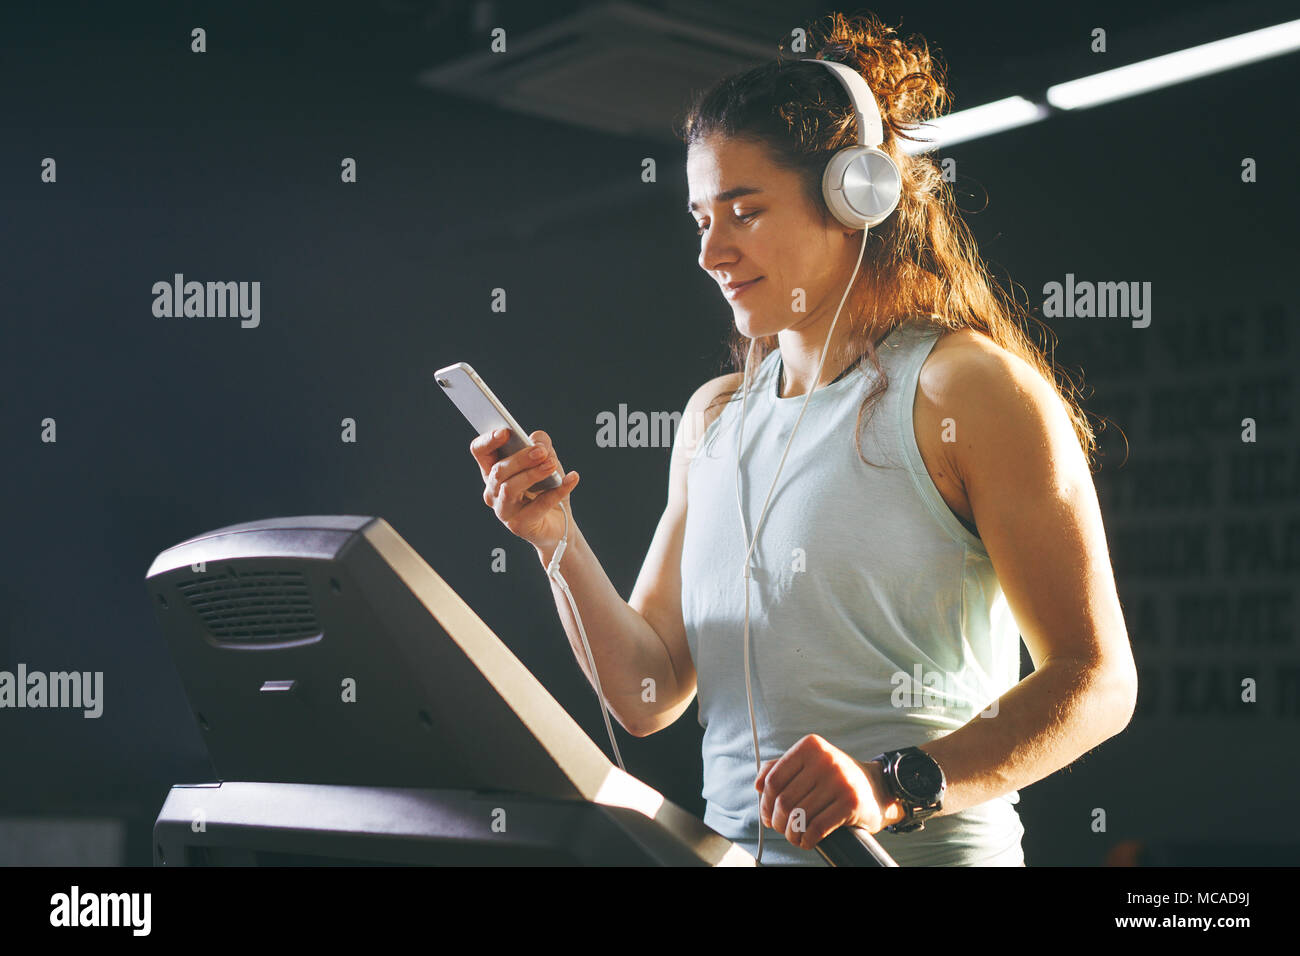 Theme sport and music. A beautiful Caucasian woman running in gym on  treadmill. On head big white headphones, the girl listens to music during a  cardio workout for weight loss and uses